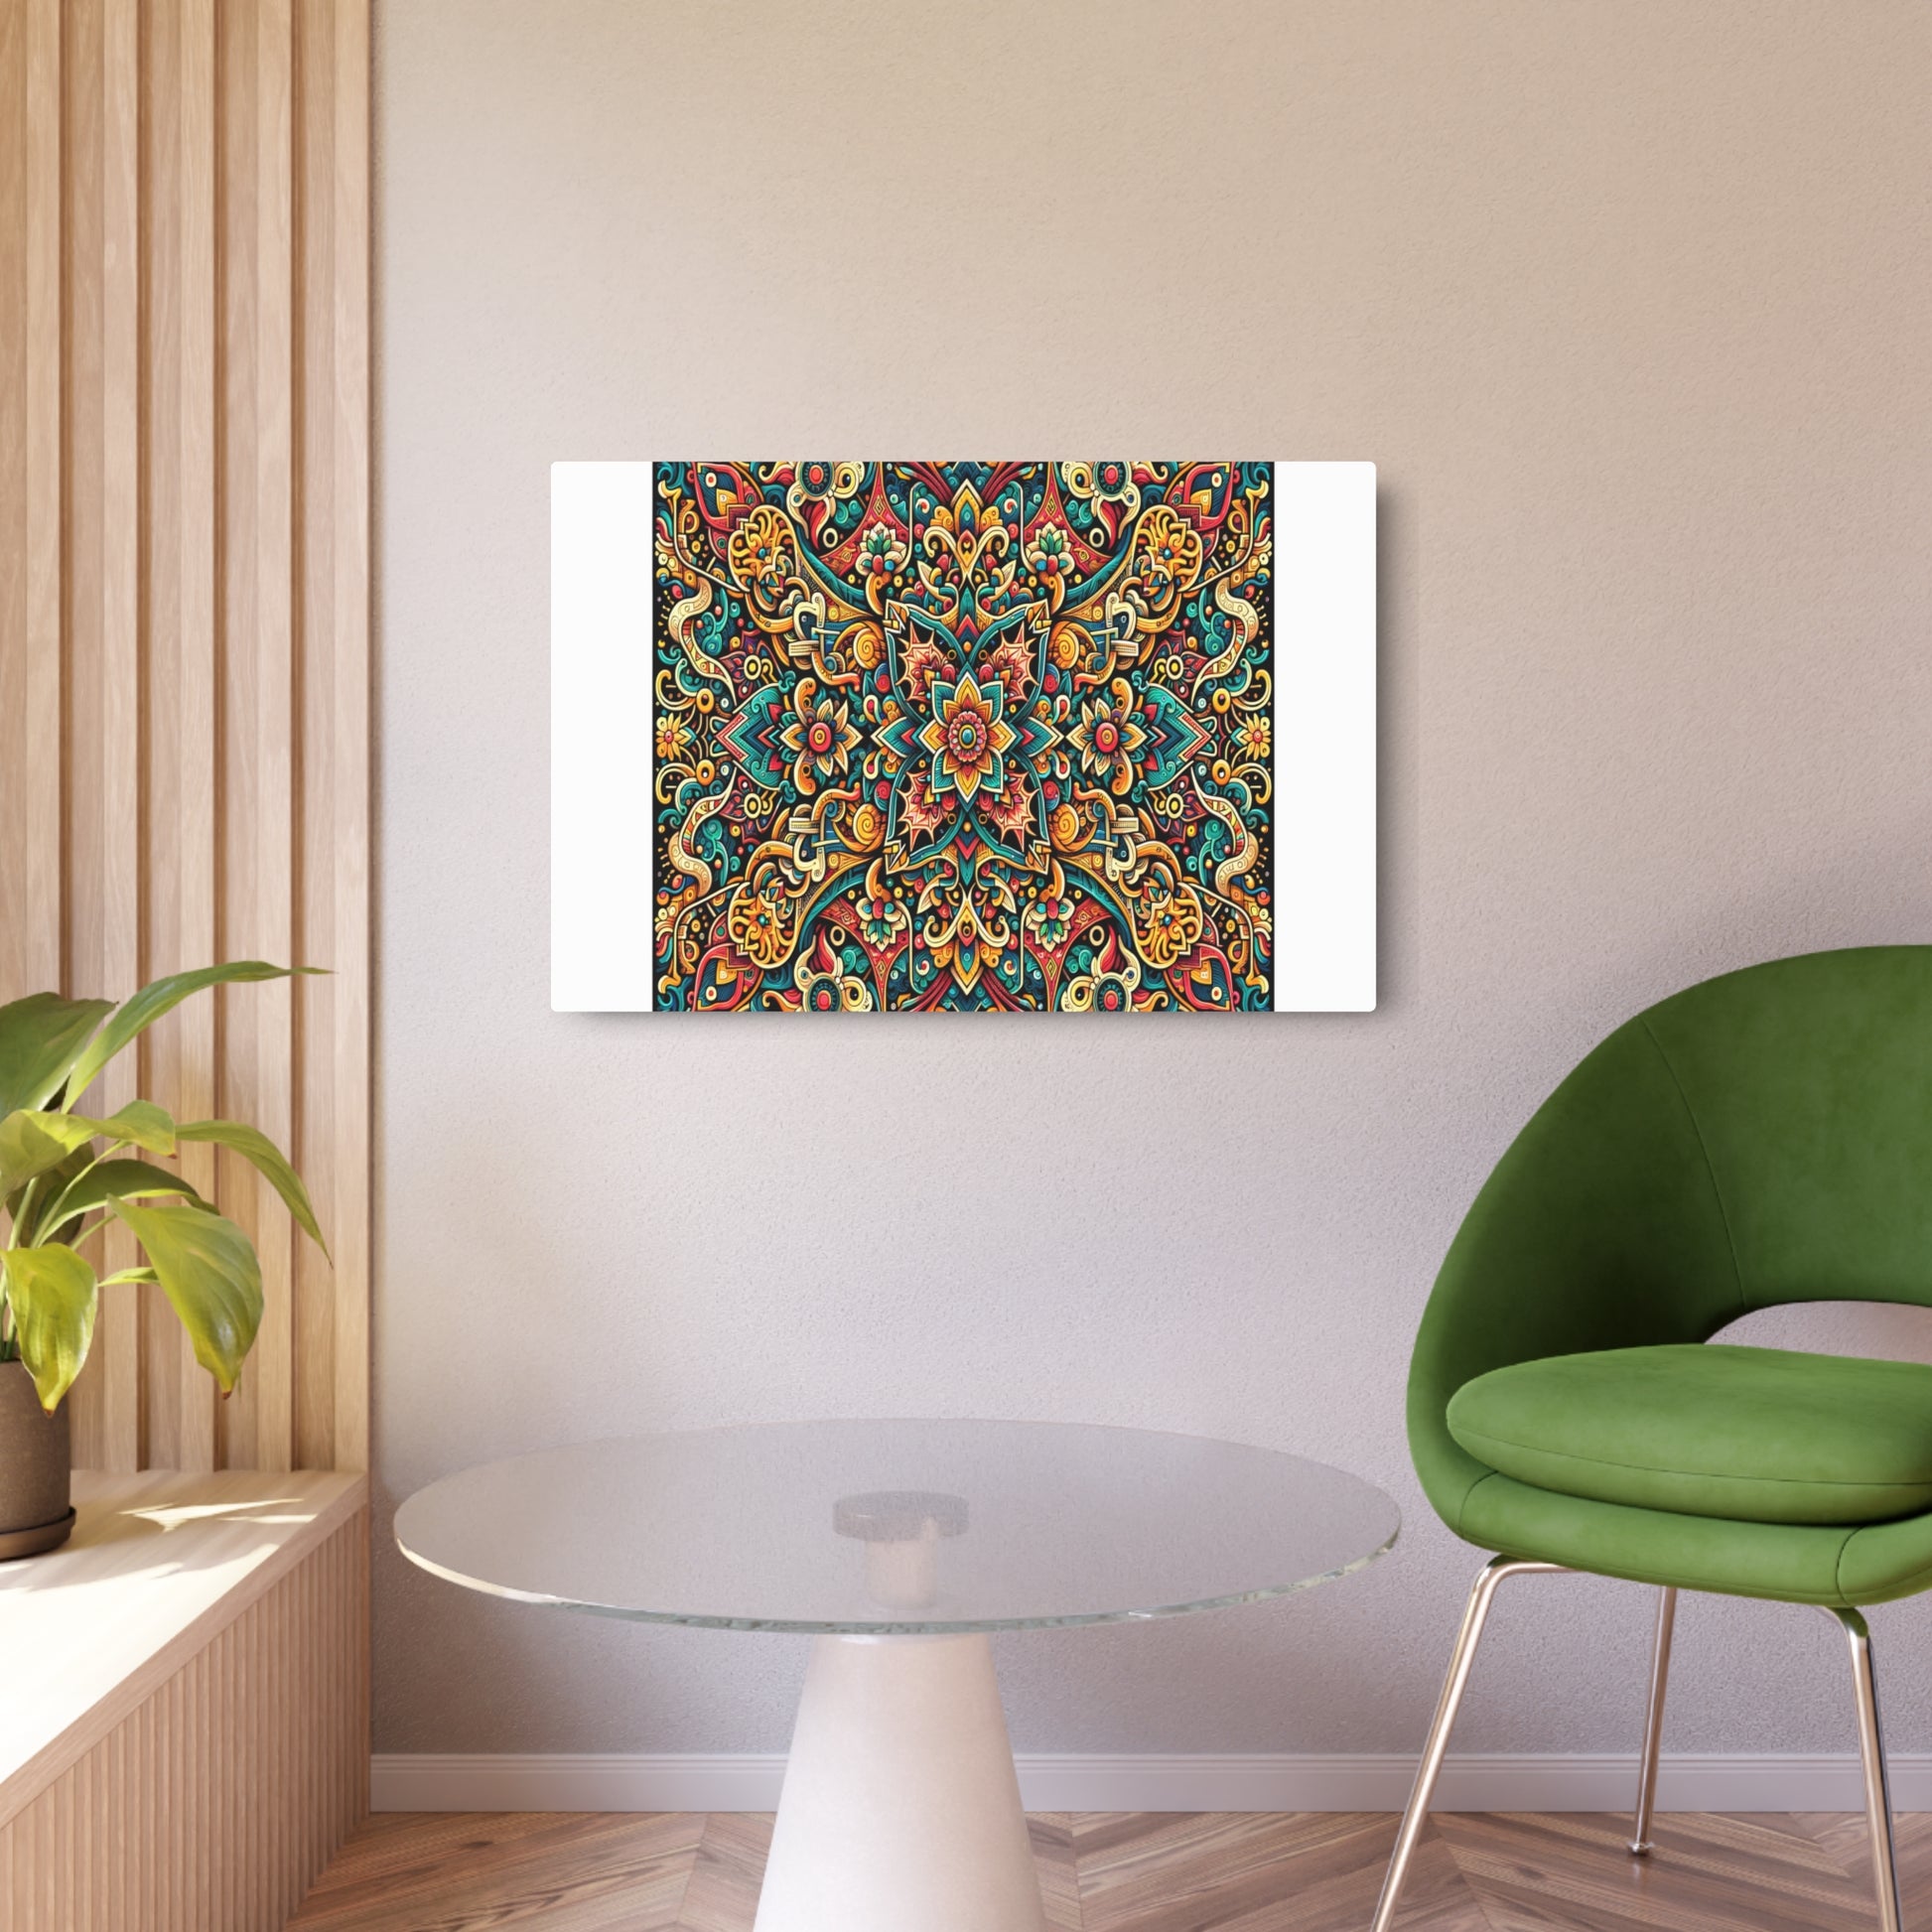 Metal Poster Art | "Traditional Indonesian Batik Art Piece - Vibrant Colored, Intricately Designed, Unique Geometric Patterns in Non-Western & Global Styles Category - Metal Poster Art 36″ x 24″ (Horizontal) 0.12''